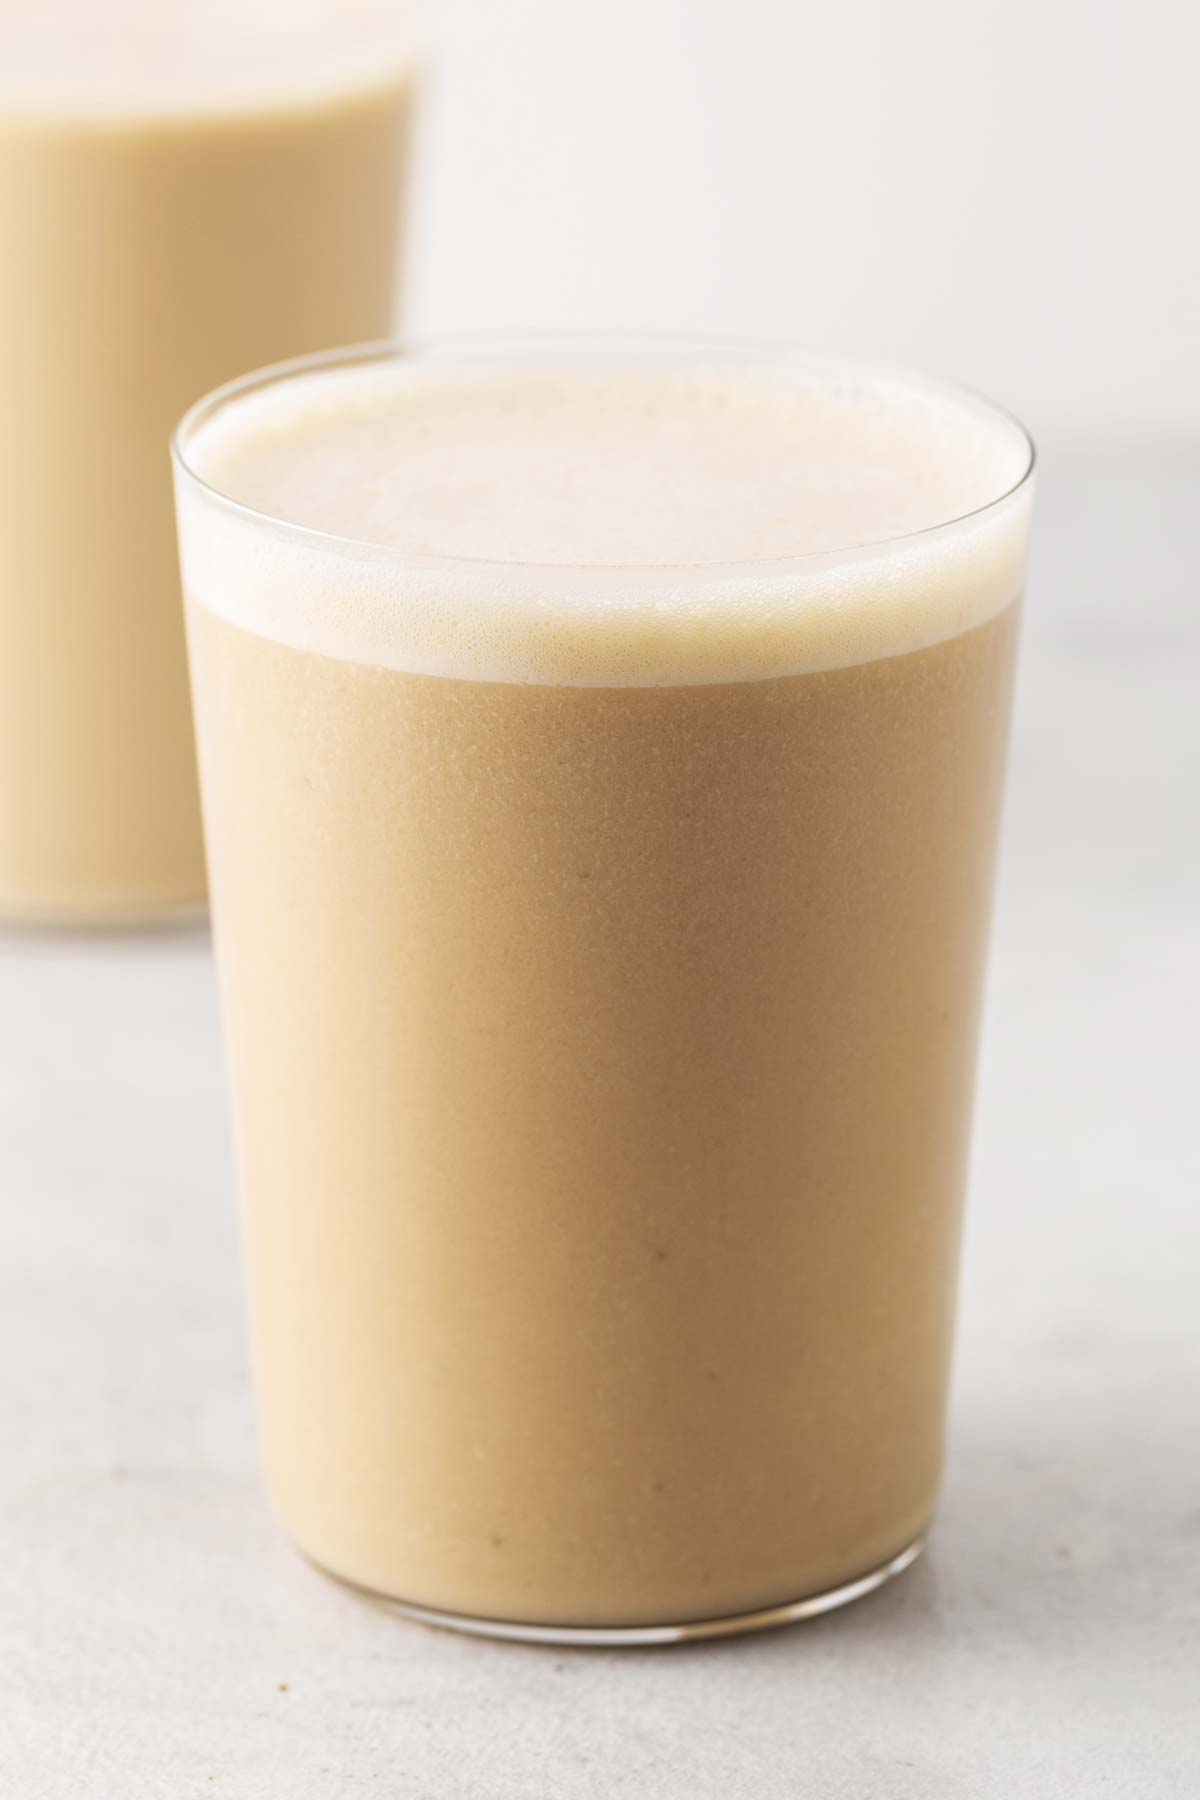 Banana protein shake in a cup.